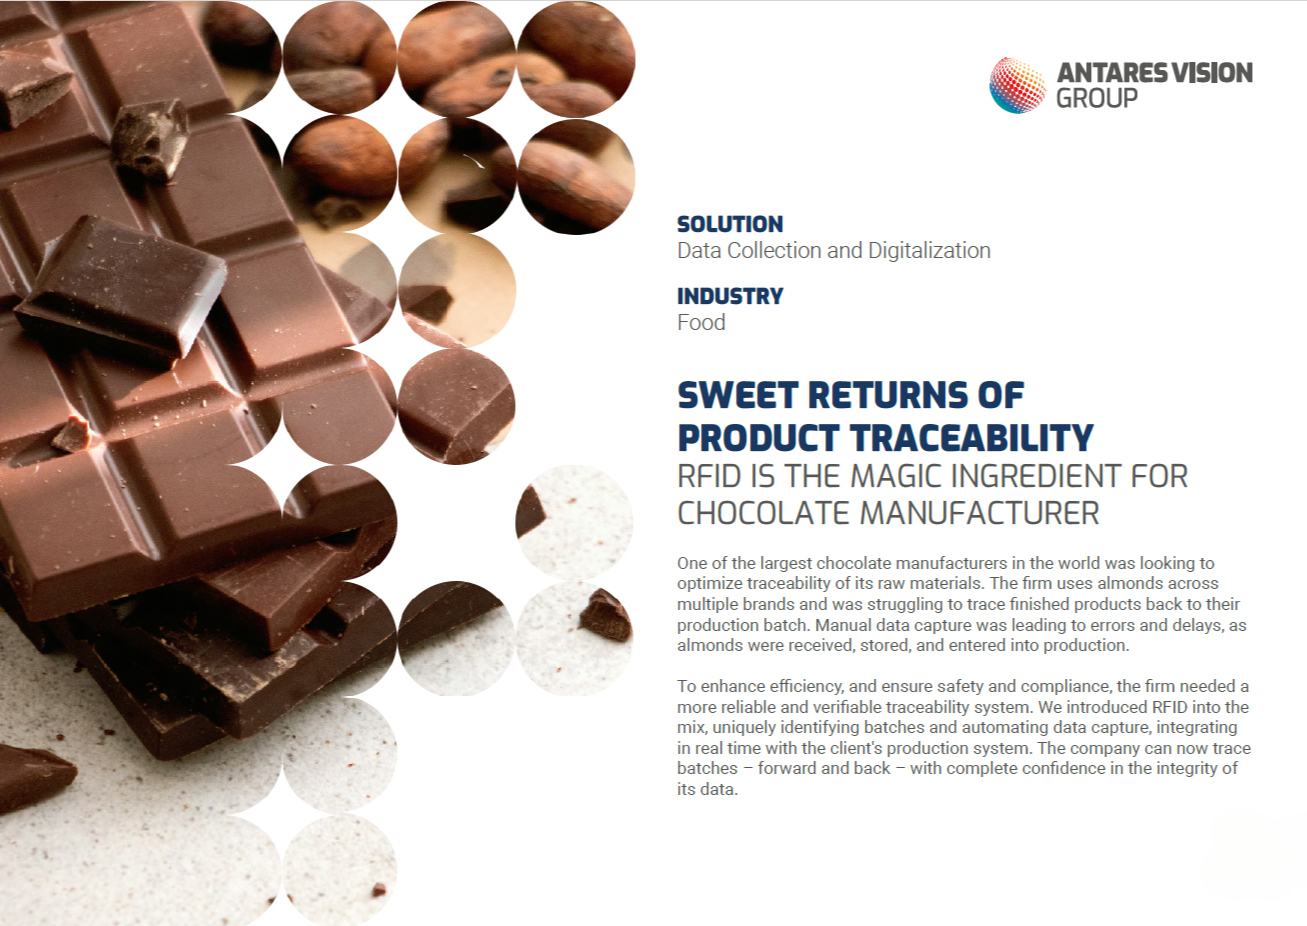 SWEET RETURNS OF PRODUCT TRACEABILITY